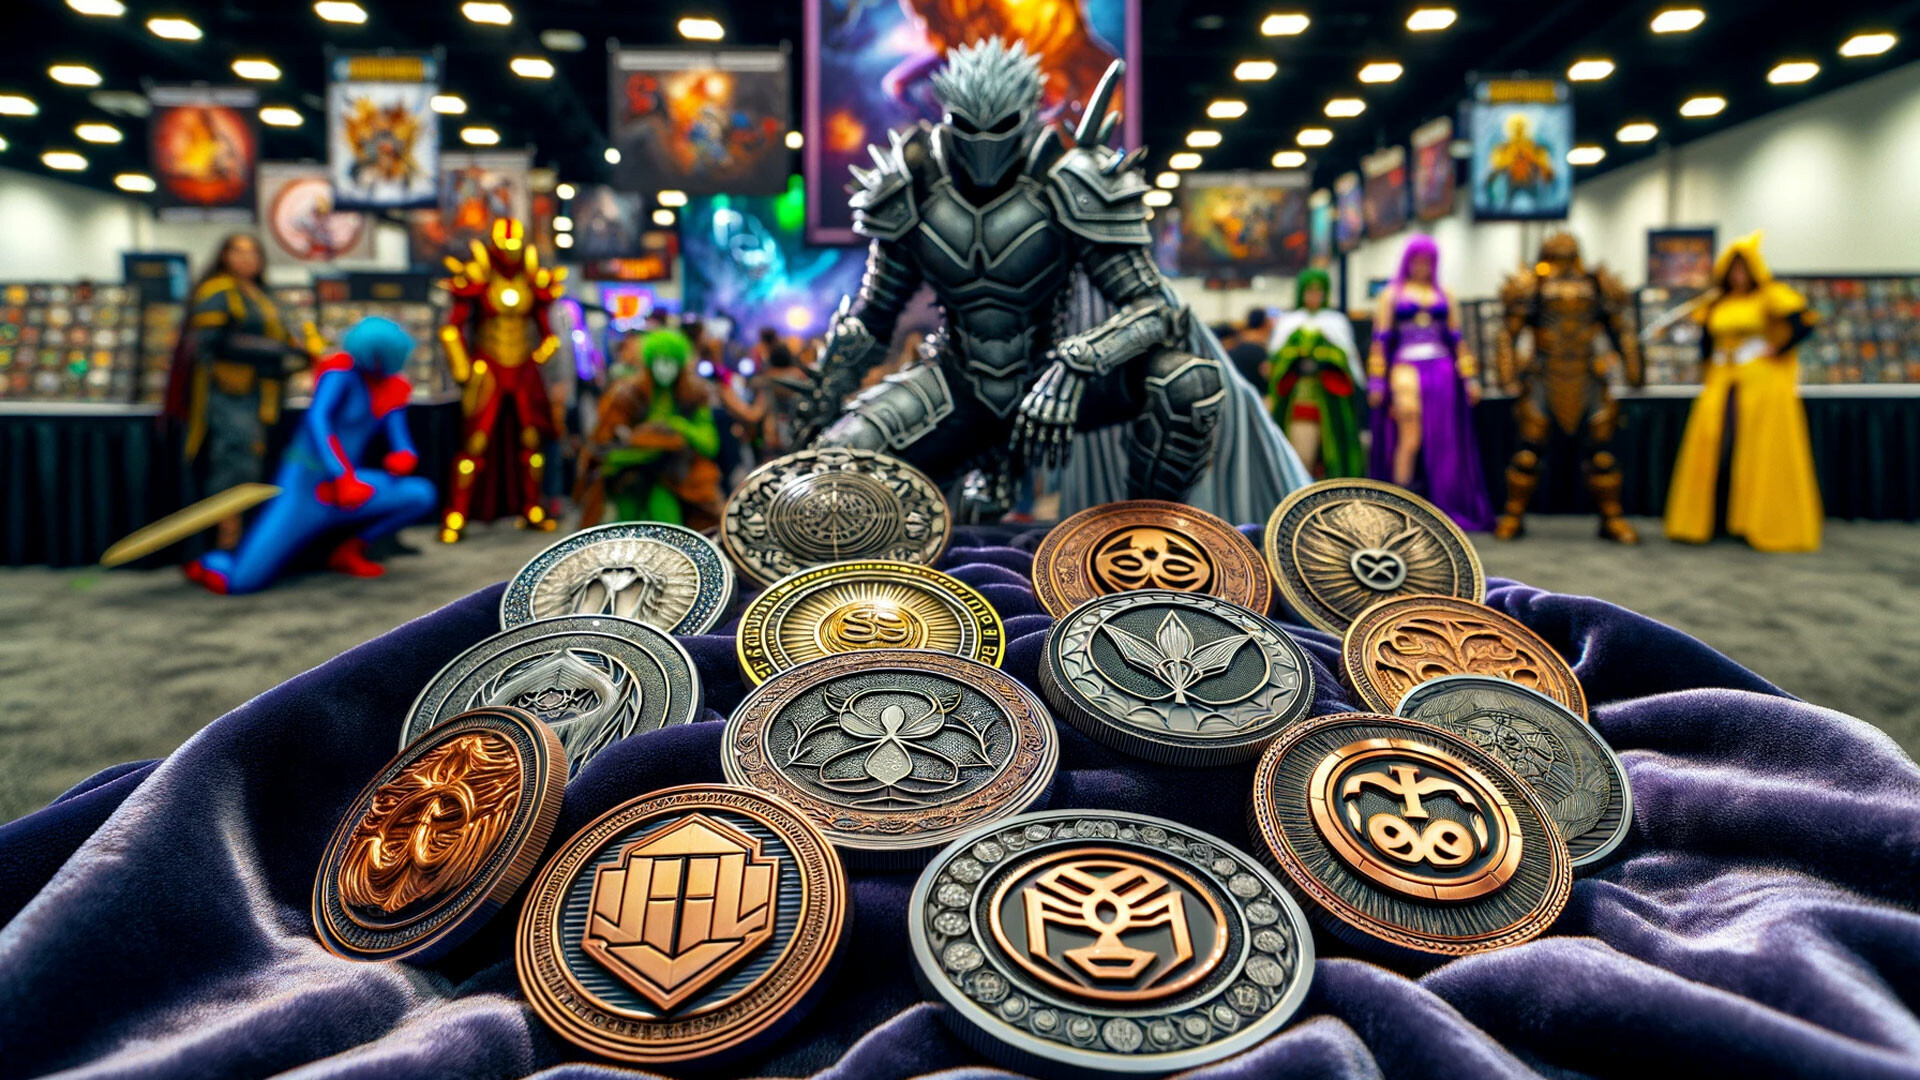 Custom Coins to Enhance the Cosplay Experience